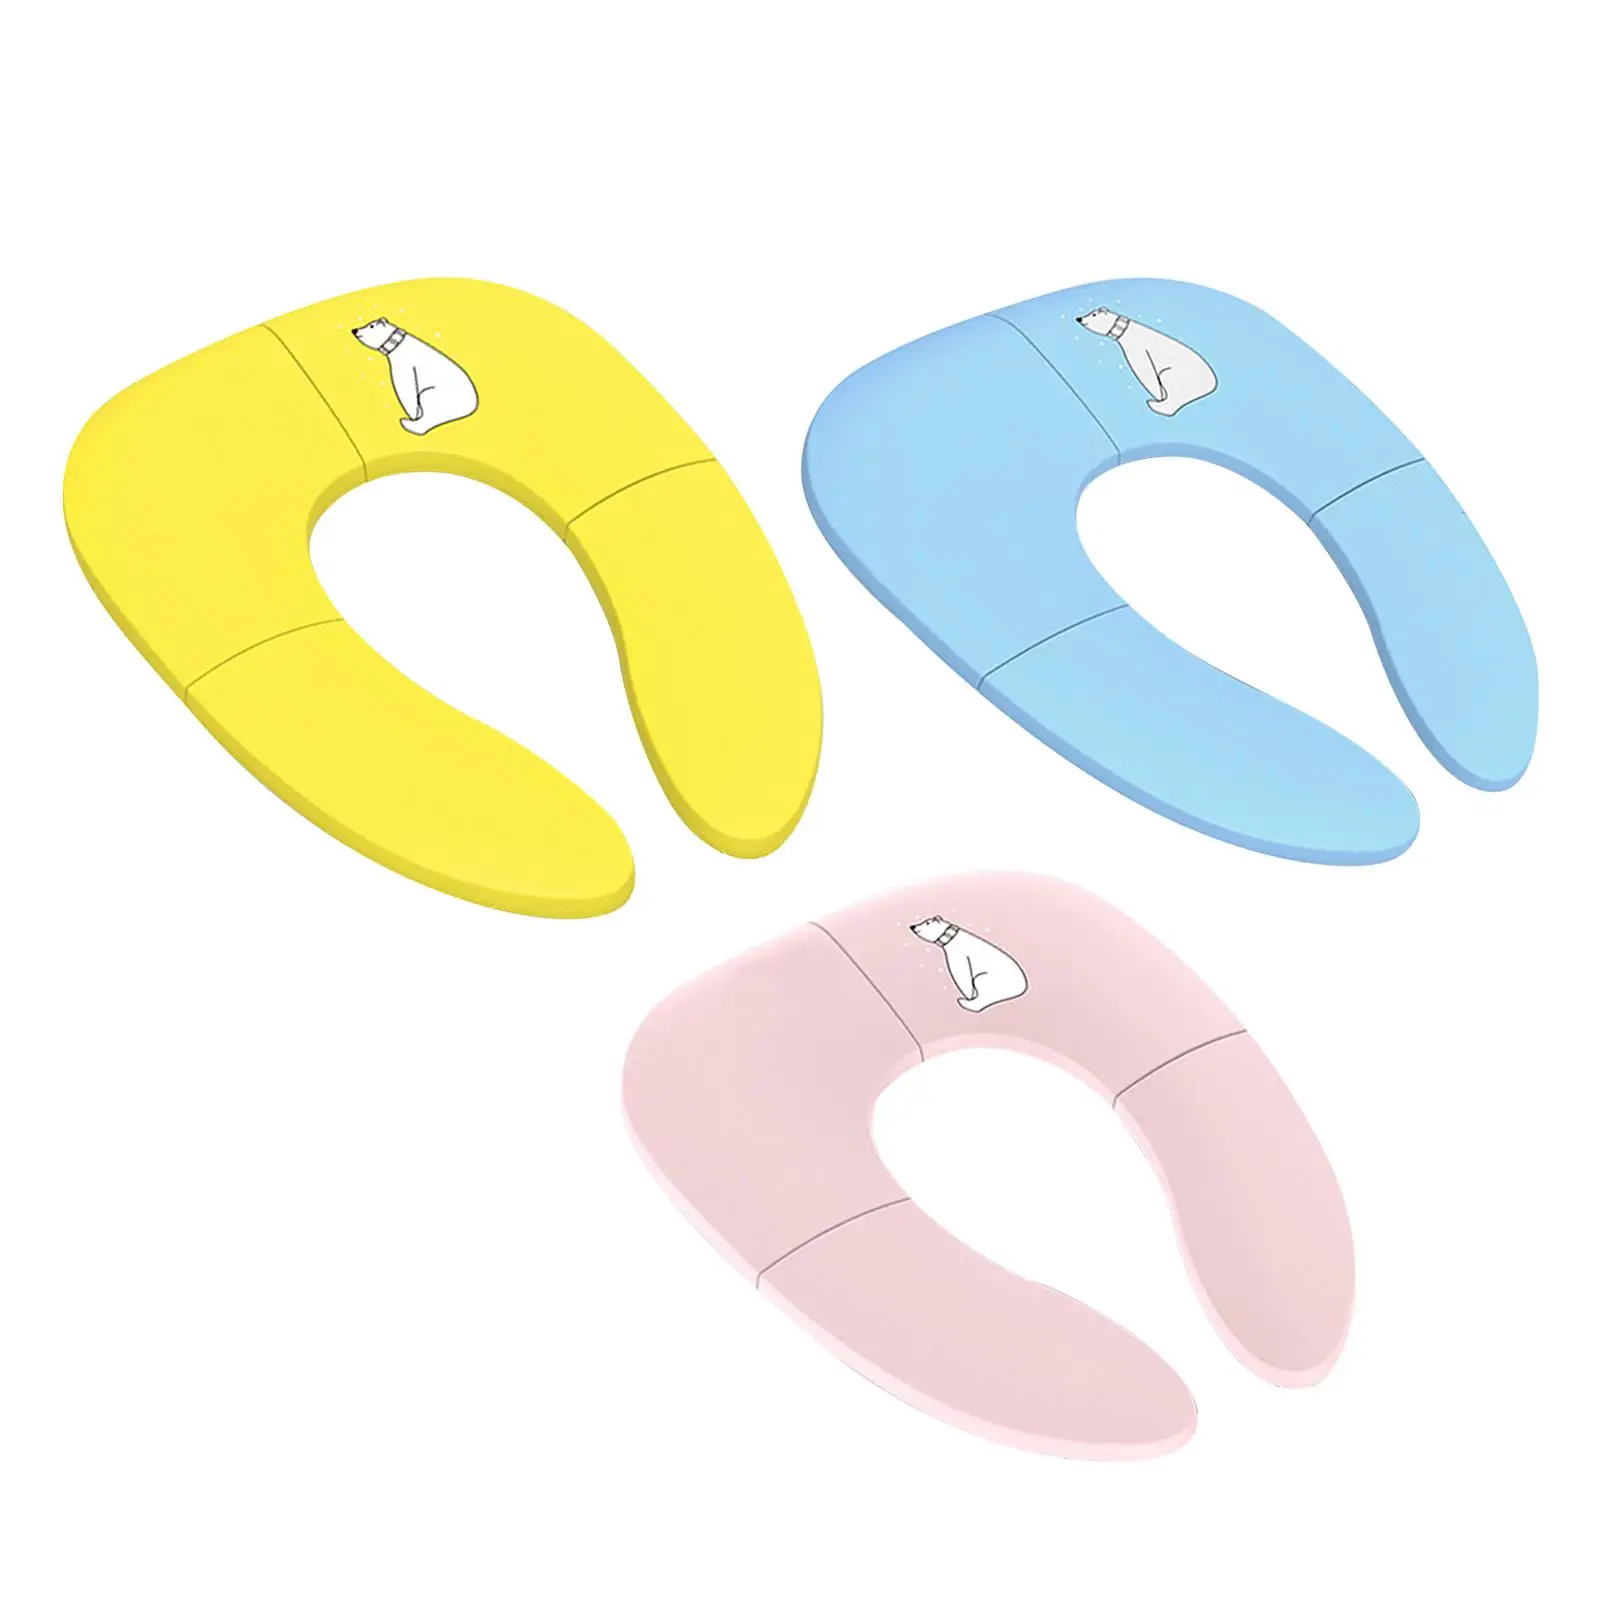 Foldable Toilet Cover Reusable Portable Non Slip Toilet Seat pad Toilet Cushion for Round and Oval Toilets Home Use Girls Boys